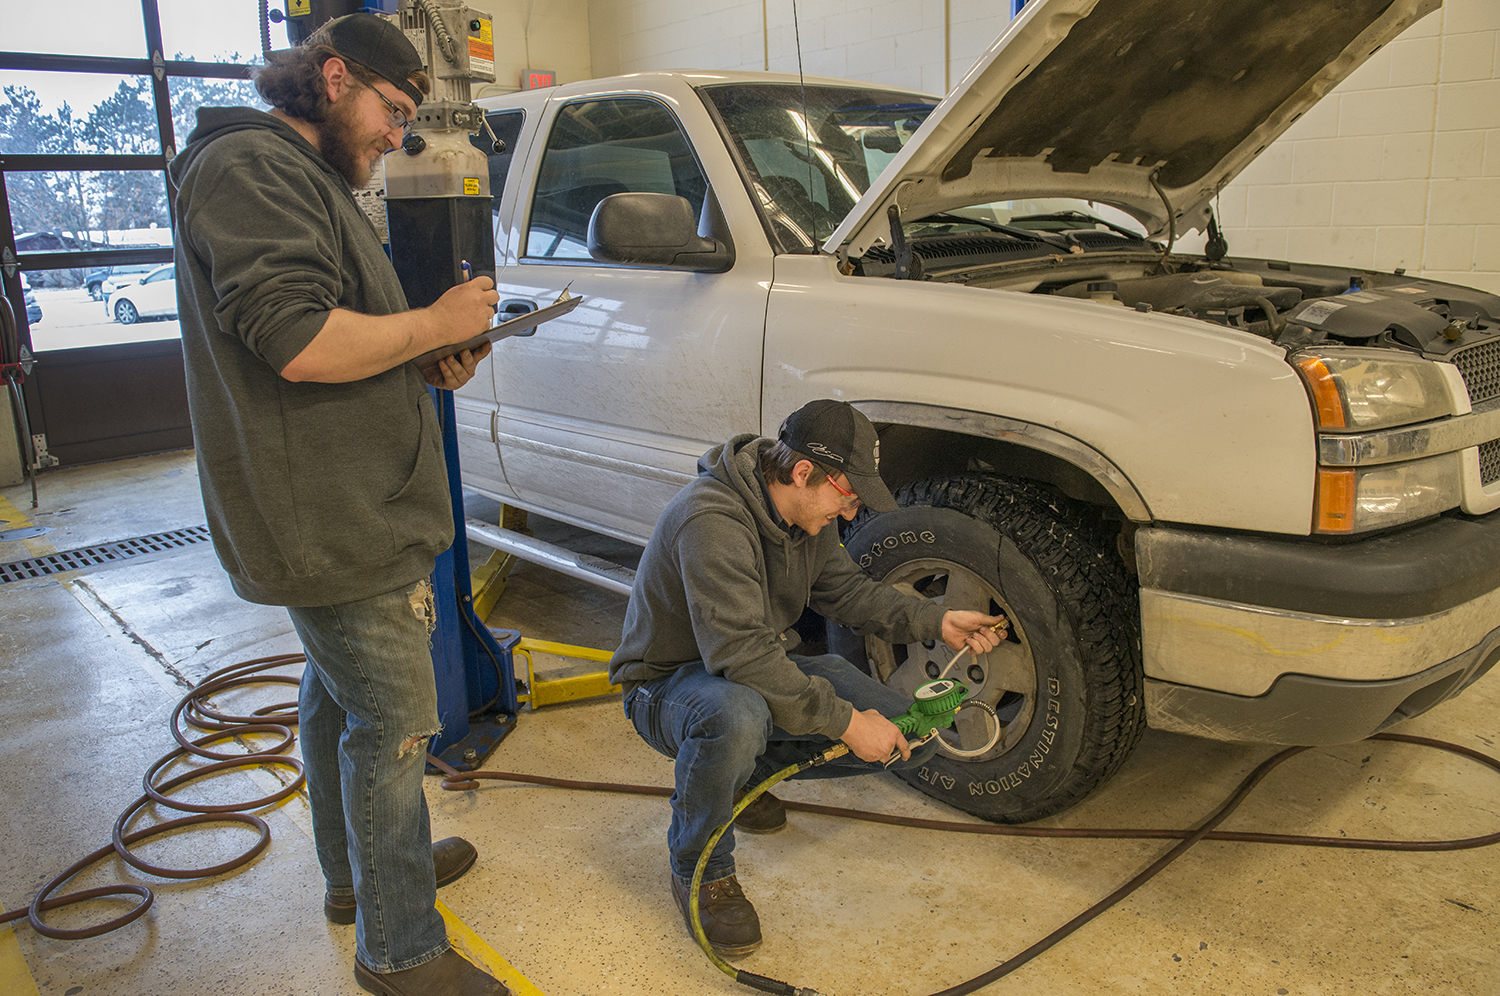 NTC’s Automotive Service and Performance program held a car winterization clinic for the Bemidji community in conjunction with the Day of Giving and local sponsors.